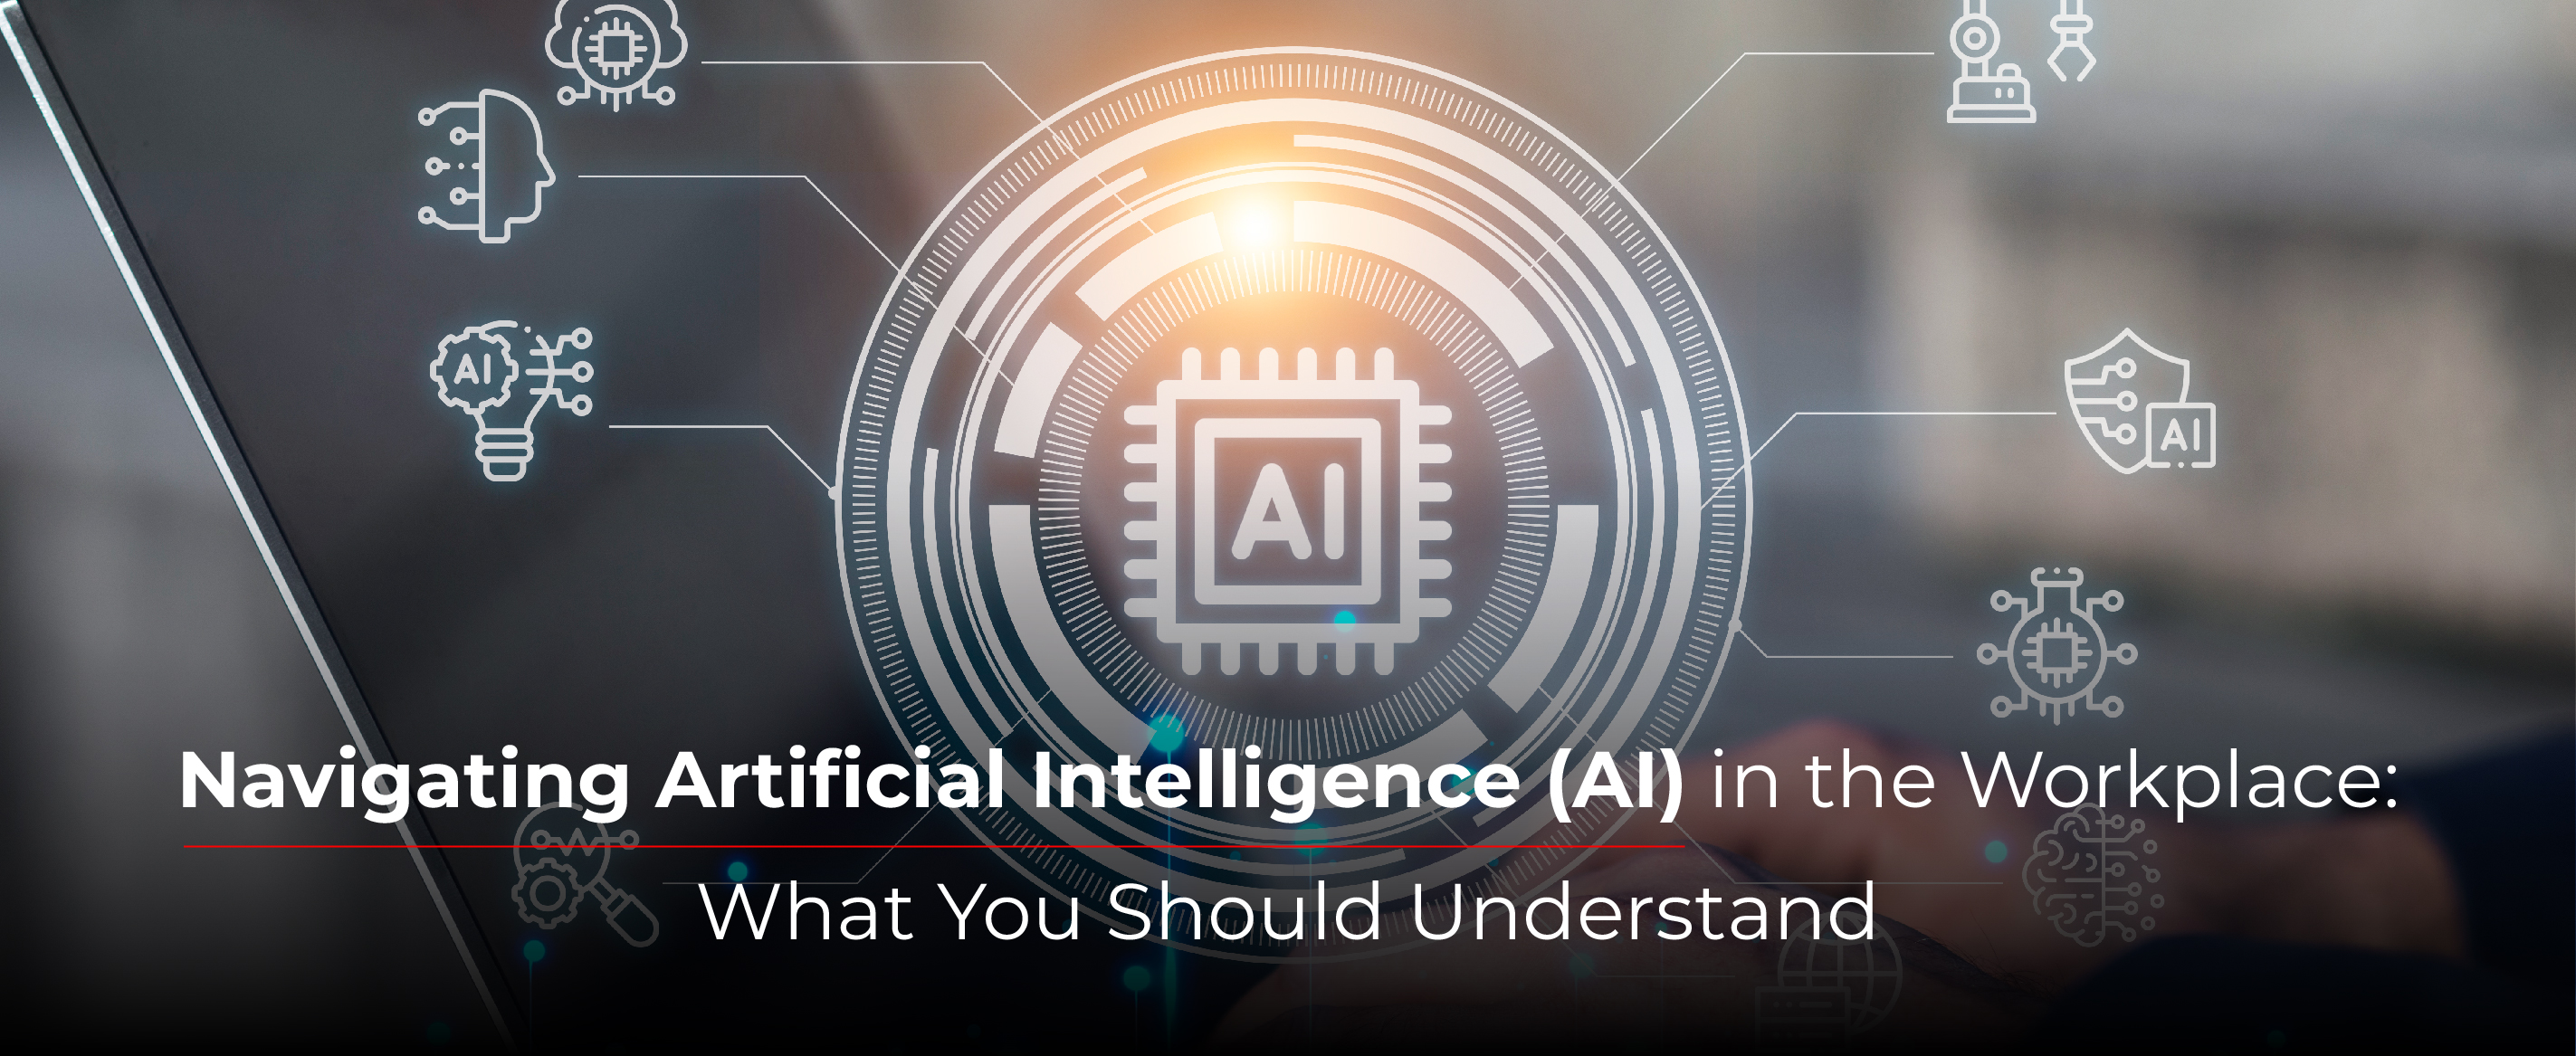 Navigating Artificial Intelligence (AI) in the Workplace: What You Should Understand